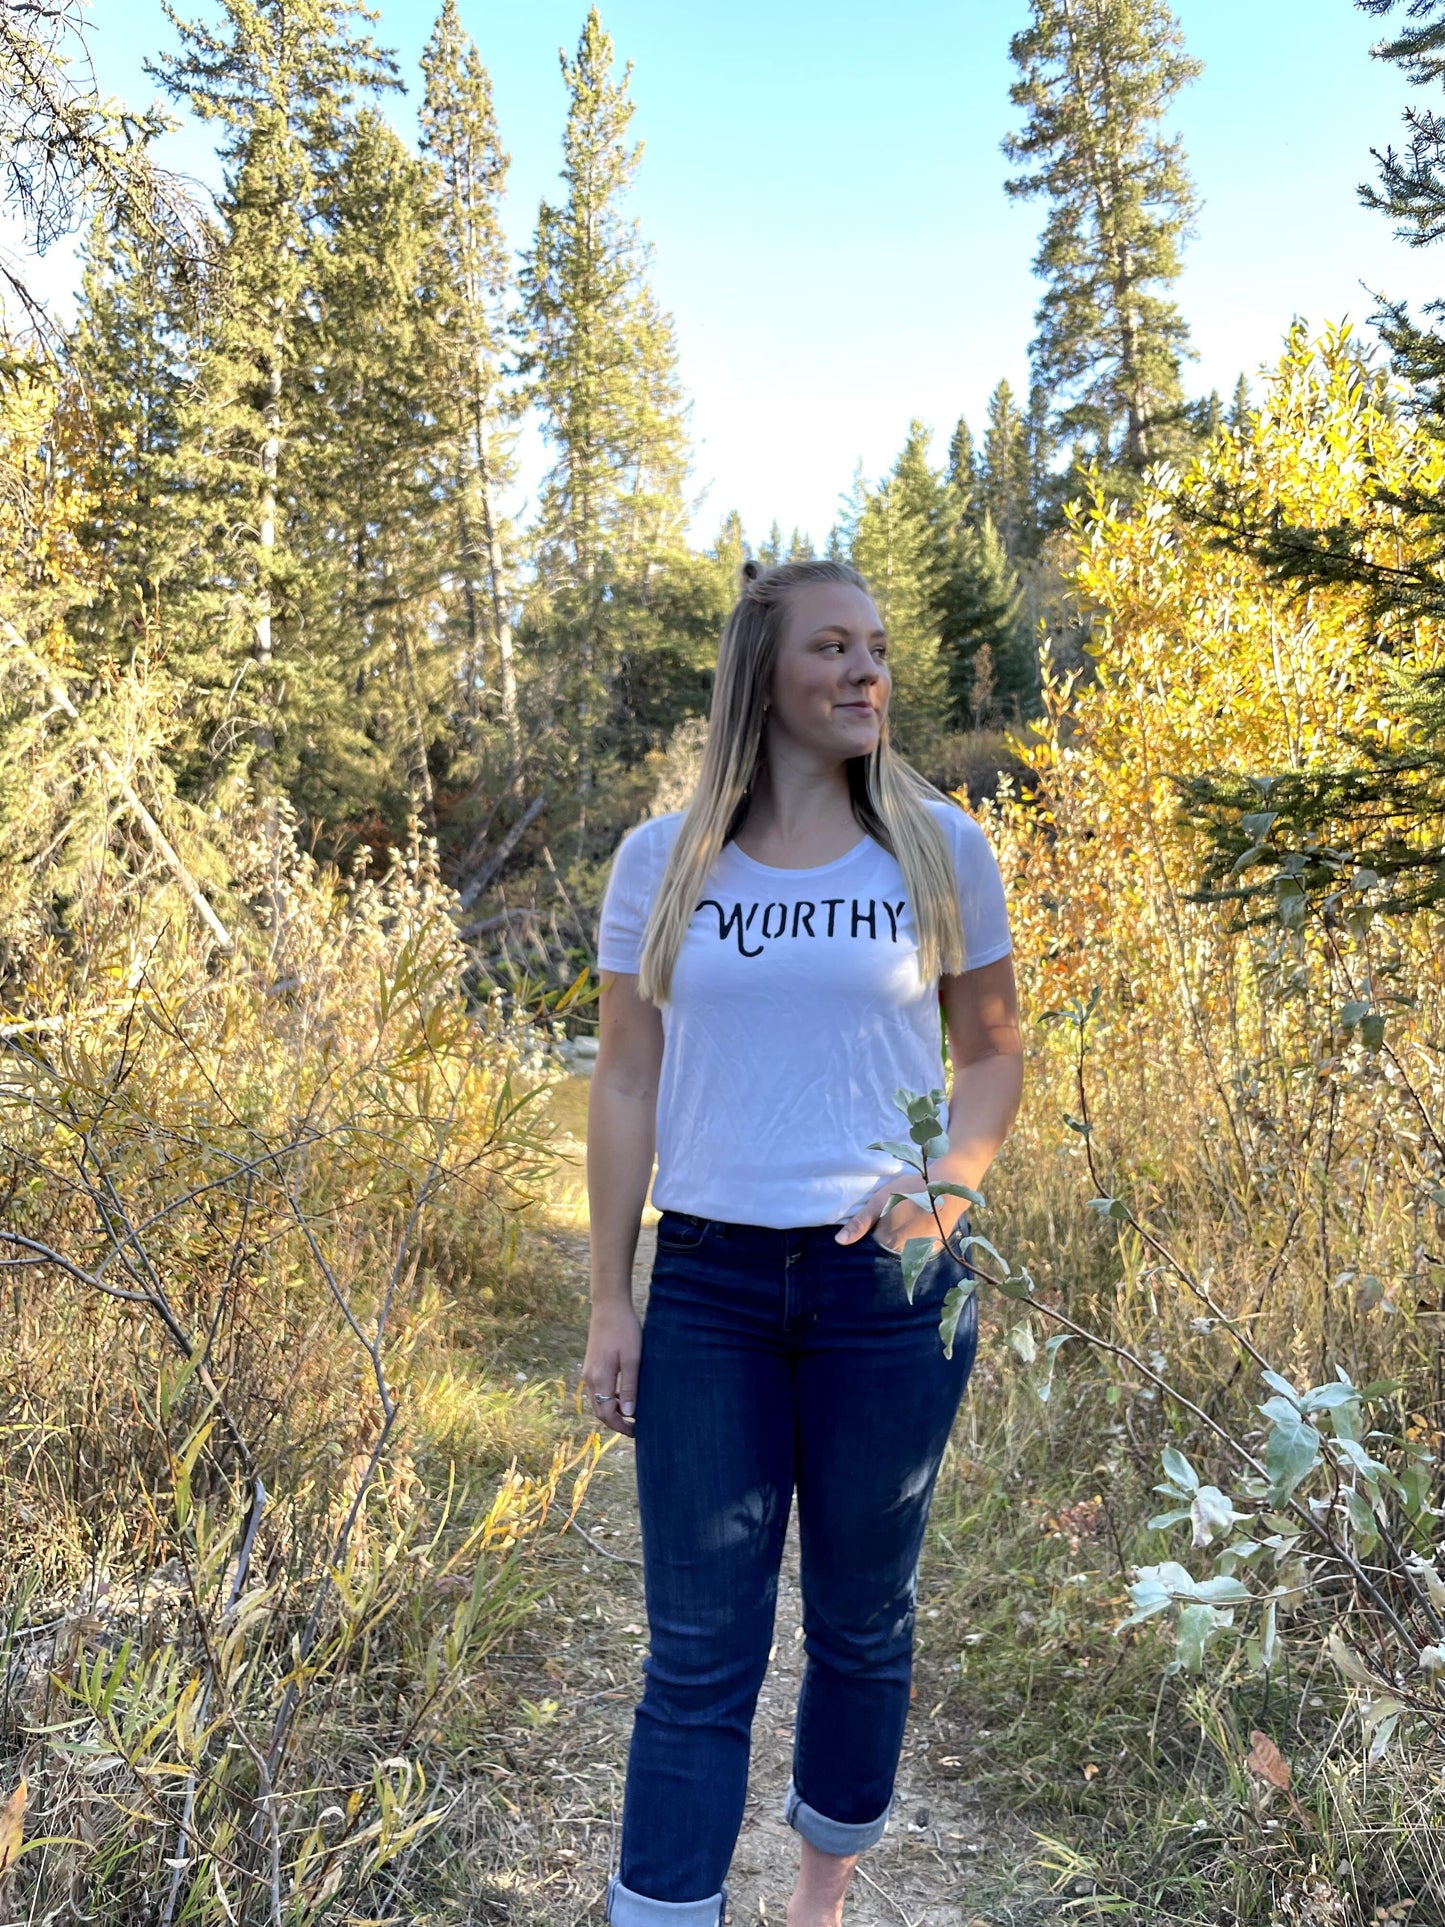 A woman standing in nature looking to the right while wearing a white t-shirt with black "WORTHY" lettering across the front.